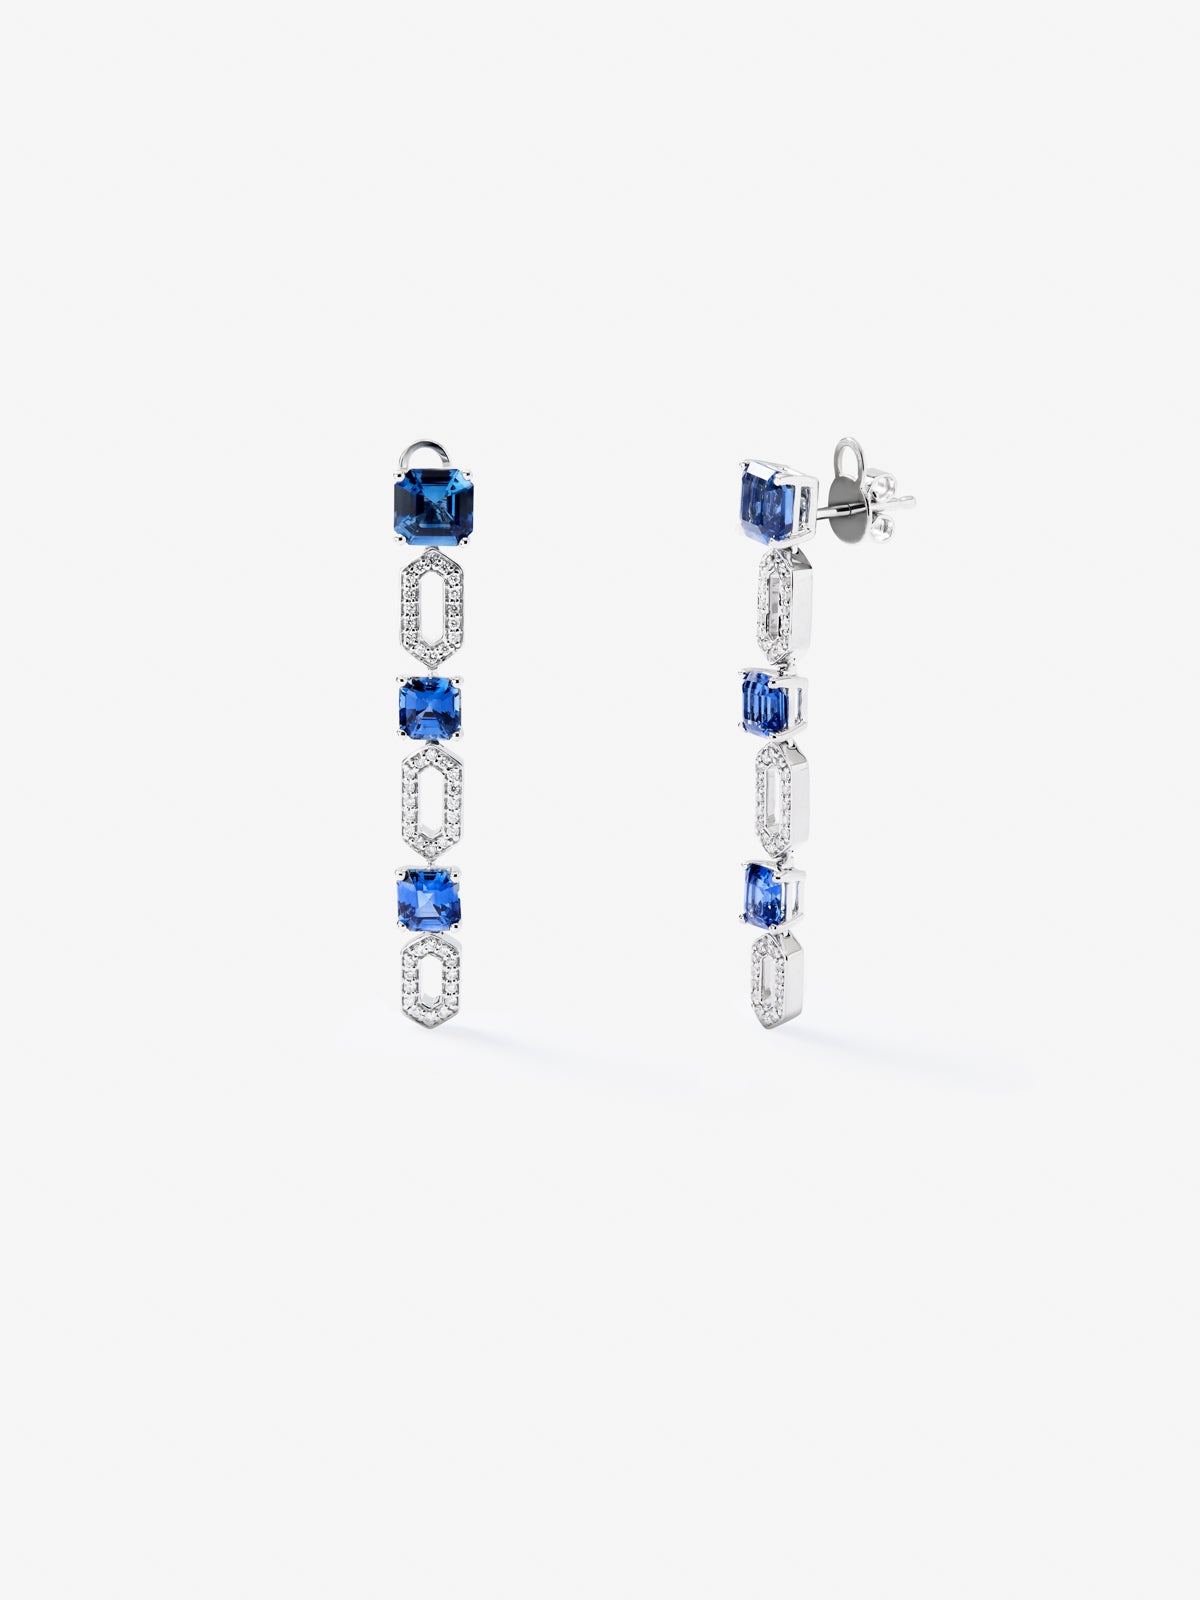 18K white gold earrings with blue zafiros in octagonal size 5.32 cts and white diamonds in bright 0.32 cts